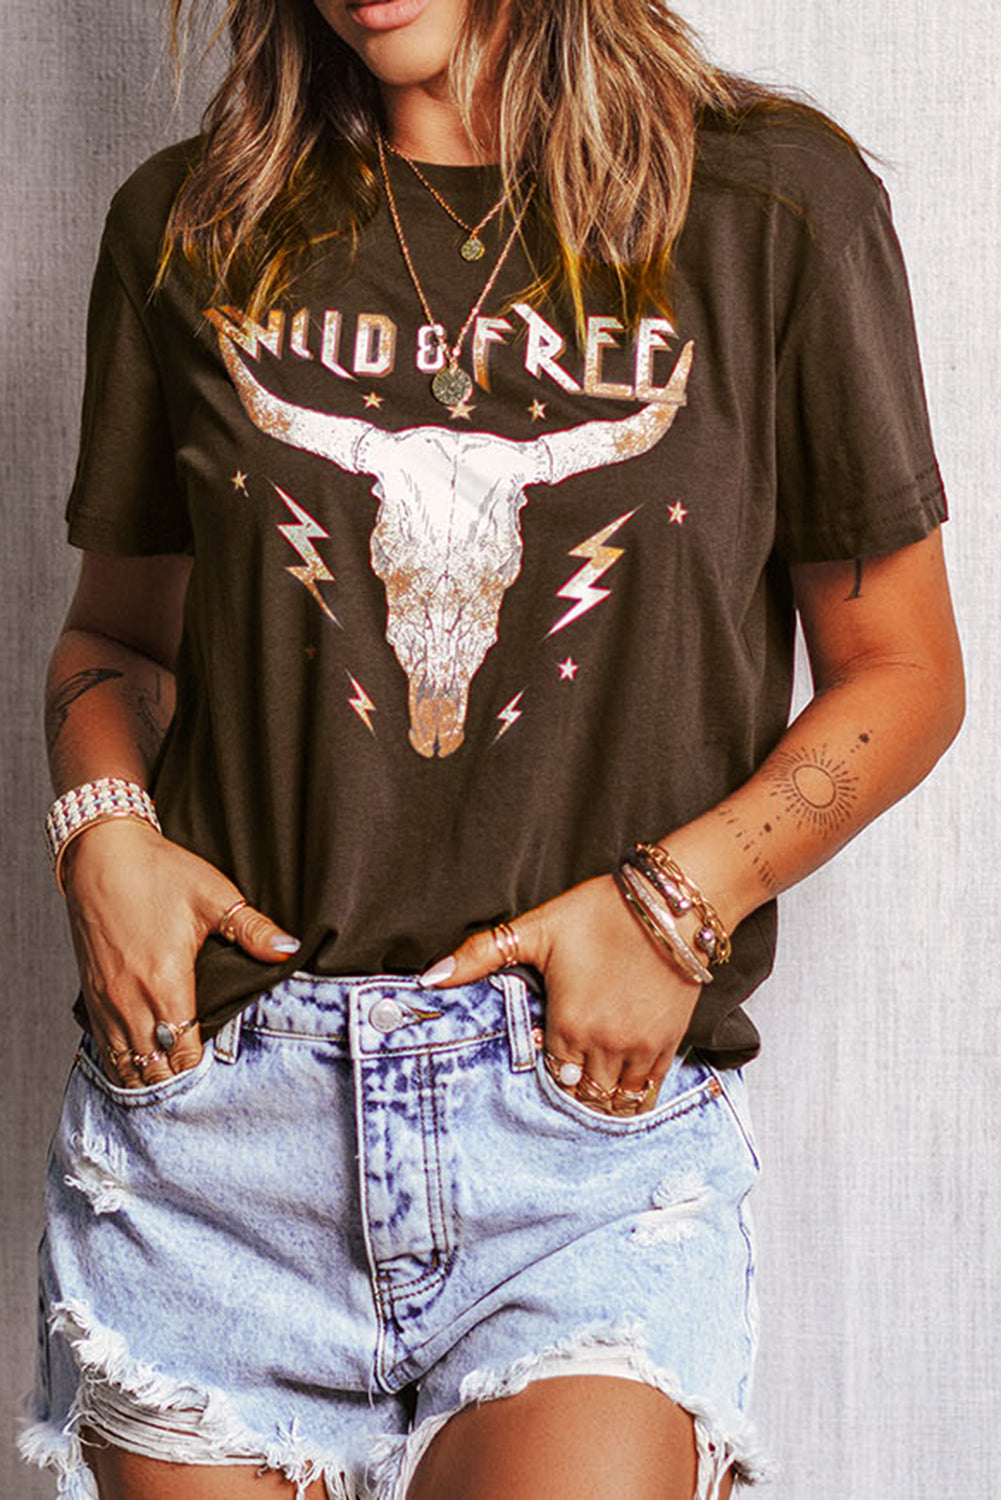 WILD FREE Animal Graphic Tee - PRIVATE LABEL STYLES